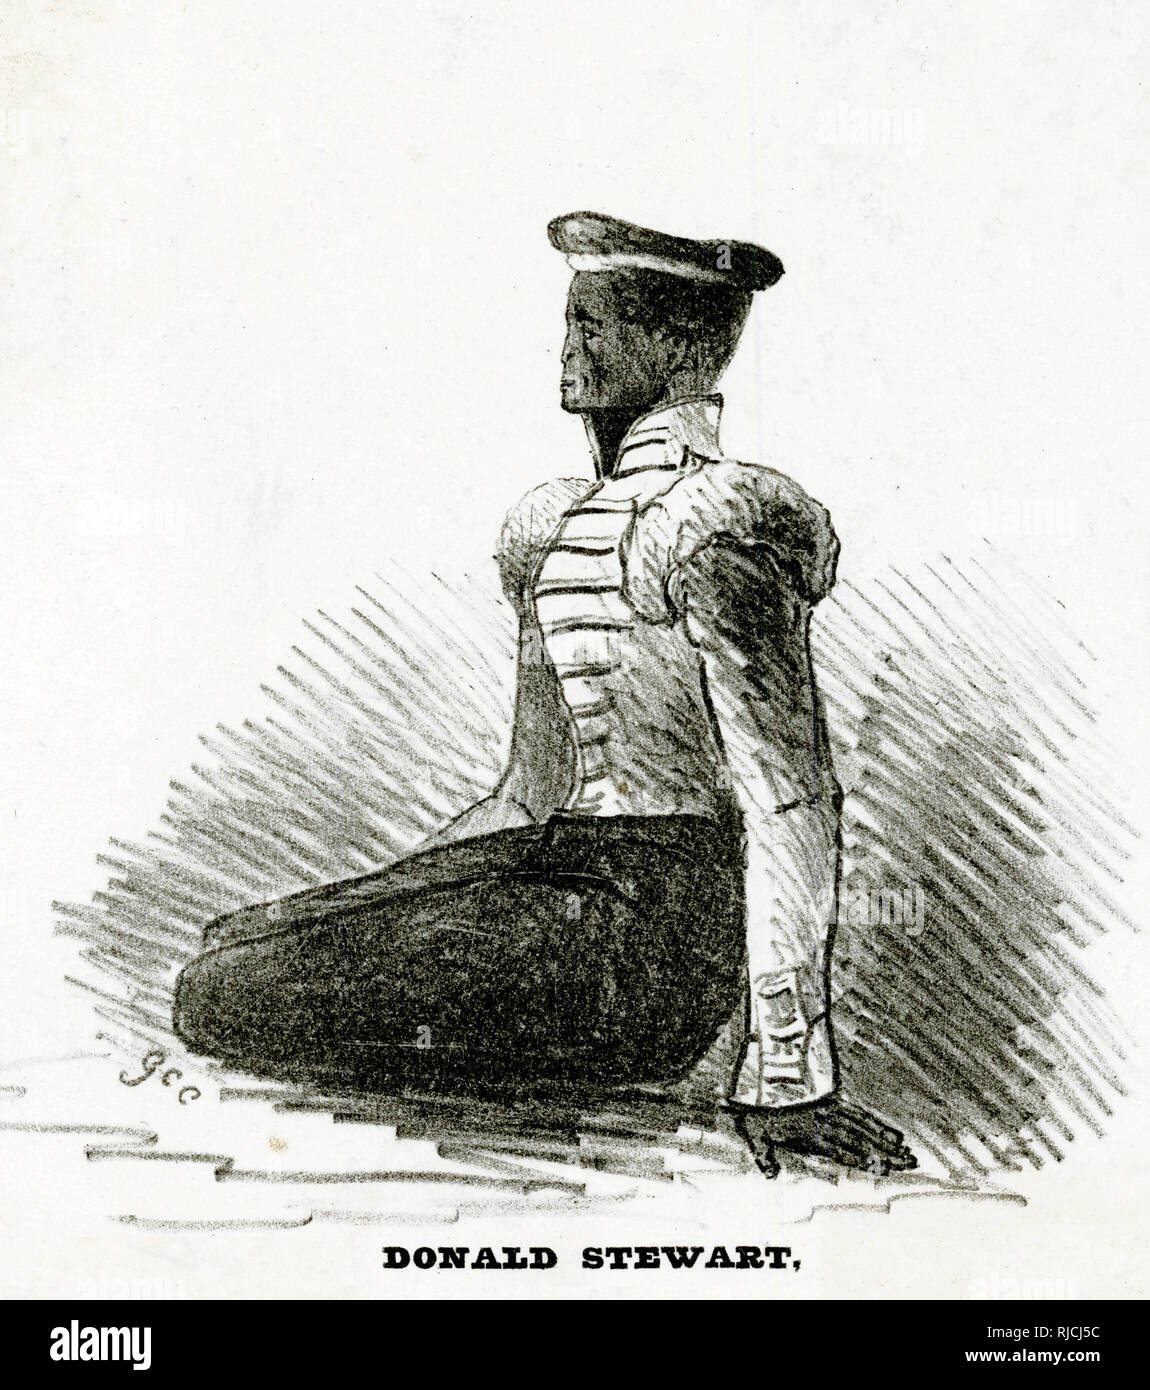 Donald Stewart, of the British First West India regiment, which consisted almost entirely of kidnapped black men, kneels in preparation of his execution on 16th August, for leading a mutiny of 280 soldiers against the British. He was formerly an African Chief named Daaga, who sold Yoruba men into slavery before being captured himself. He was brought to Trinidad as a soldier, and renamed Donald Stewart. Stock Photo